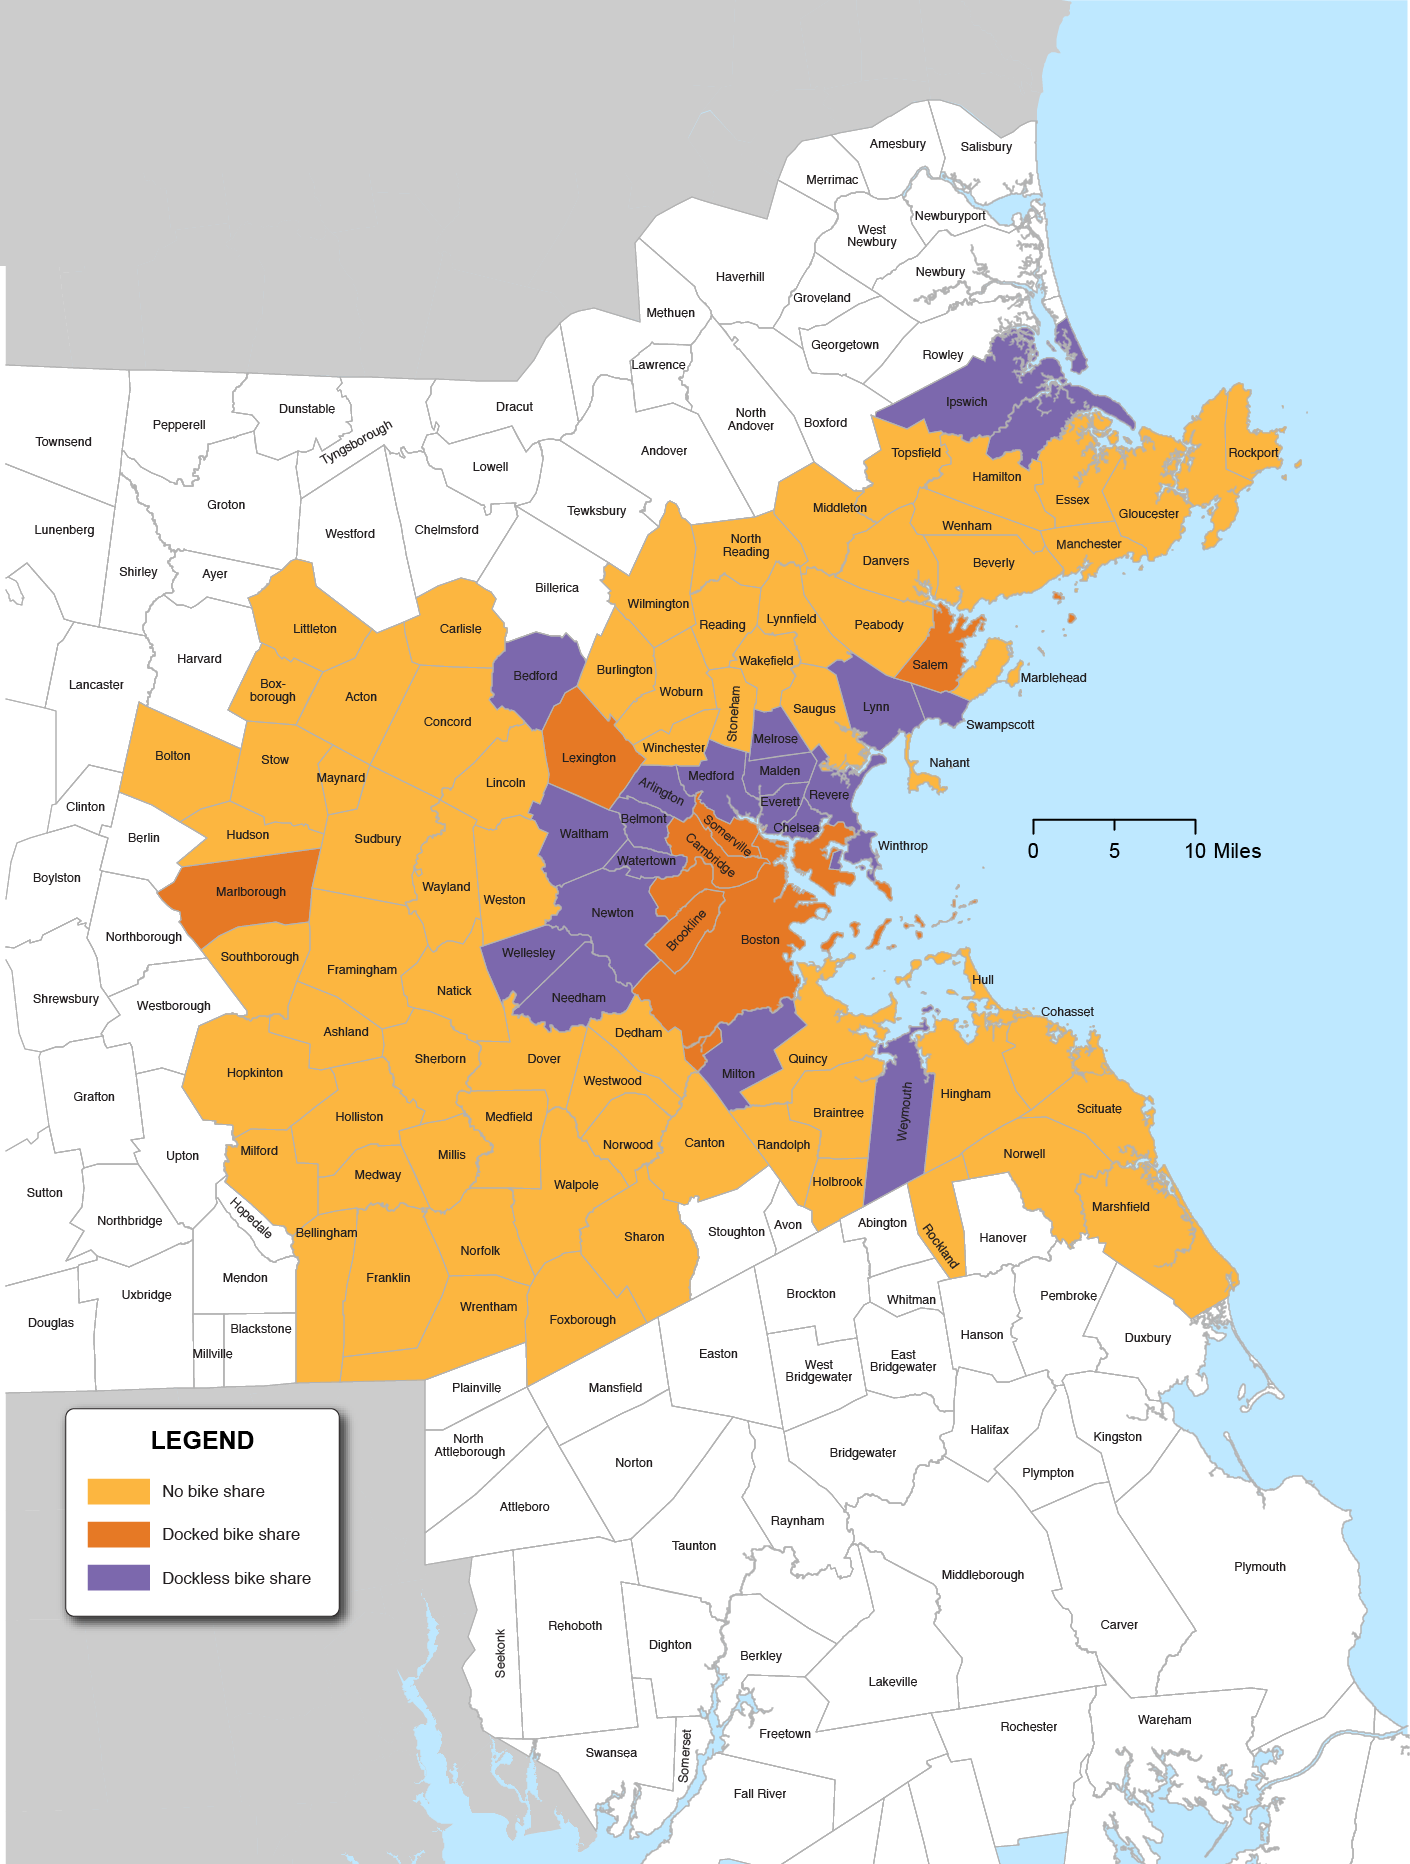 Figure 6-29 is a map of the Boston Region municipalities that have no bike share, docked bike share or dockless bike share indicated by different colors.